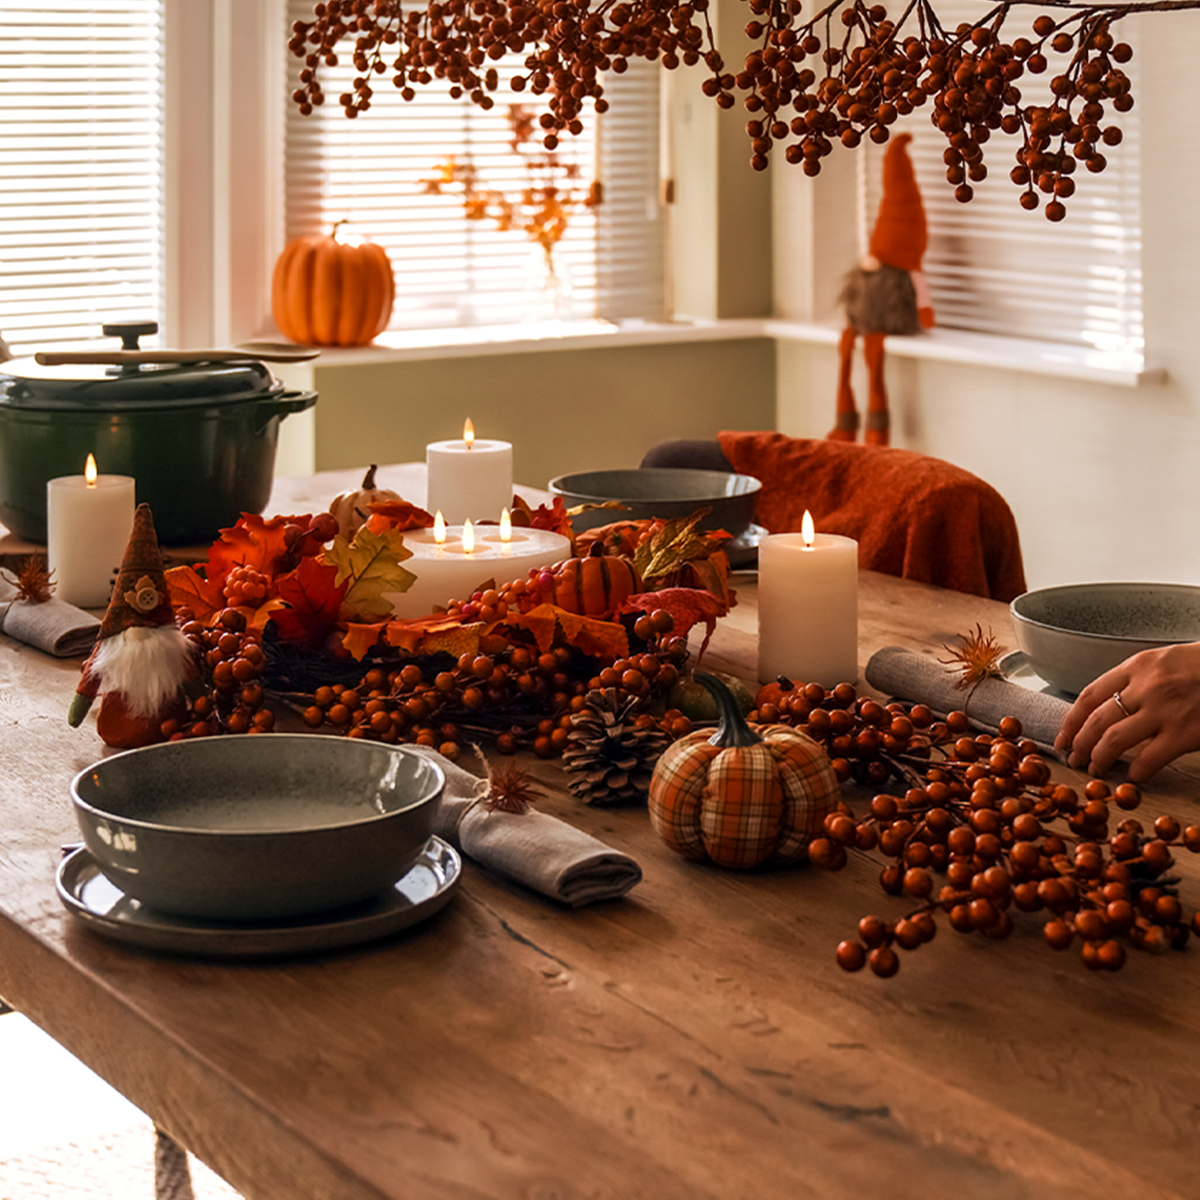 Fall in love with Autumn with this seasonable tablescape